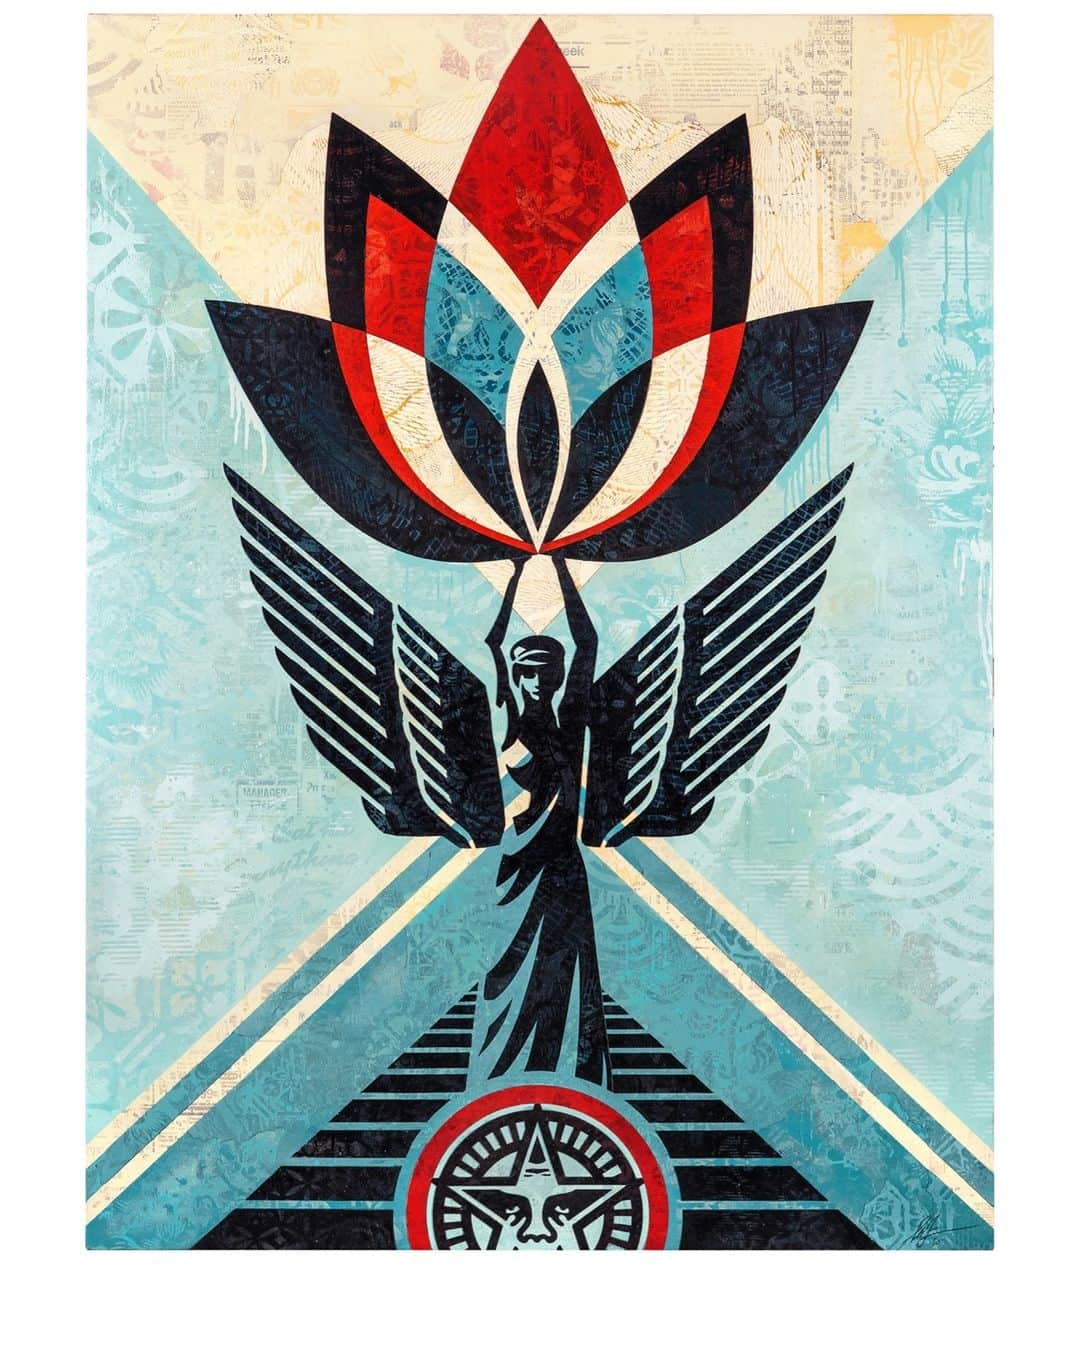 Shepard Faireyのインスタグラム：「I’m excited to announce my first solo exhibition, “Future Mosaic,” opening March 15th at @operagallery in Dubai, UAE! This exhibition has been in the works for over a year, and the work I’ll be featuring is cross-cultural, breaks all superficial barriers, and stands for the values of justice, peace, and human rights. I hope that people will come away with an understanding of my belief that we are world citizens and that we all have a lot in common. The principles of respect, fairness, and equality should be global traits, and that art has a role in shaping people’s attitudes about these principles. If you’re in Dubai, don’t miss it! Visit @operagallery and the link in my bio for more details.⁠ -Shepard」